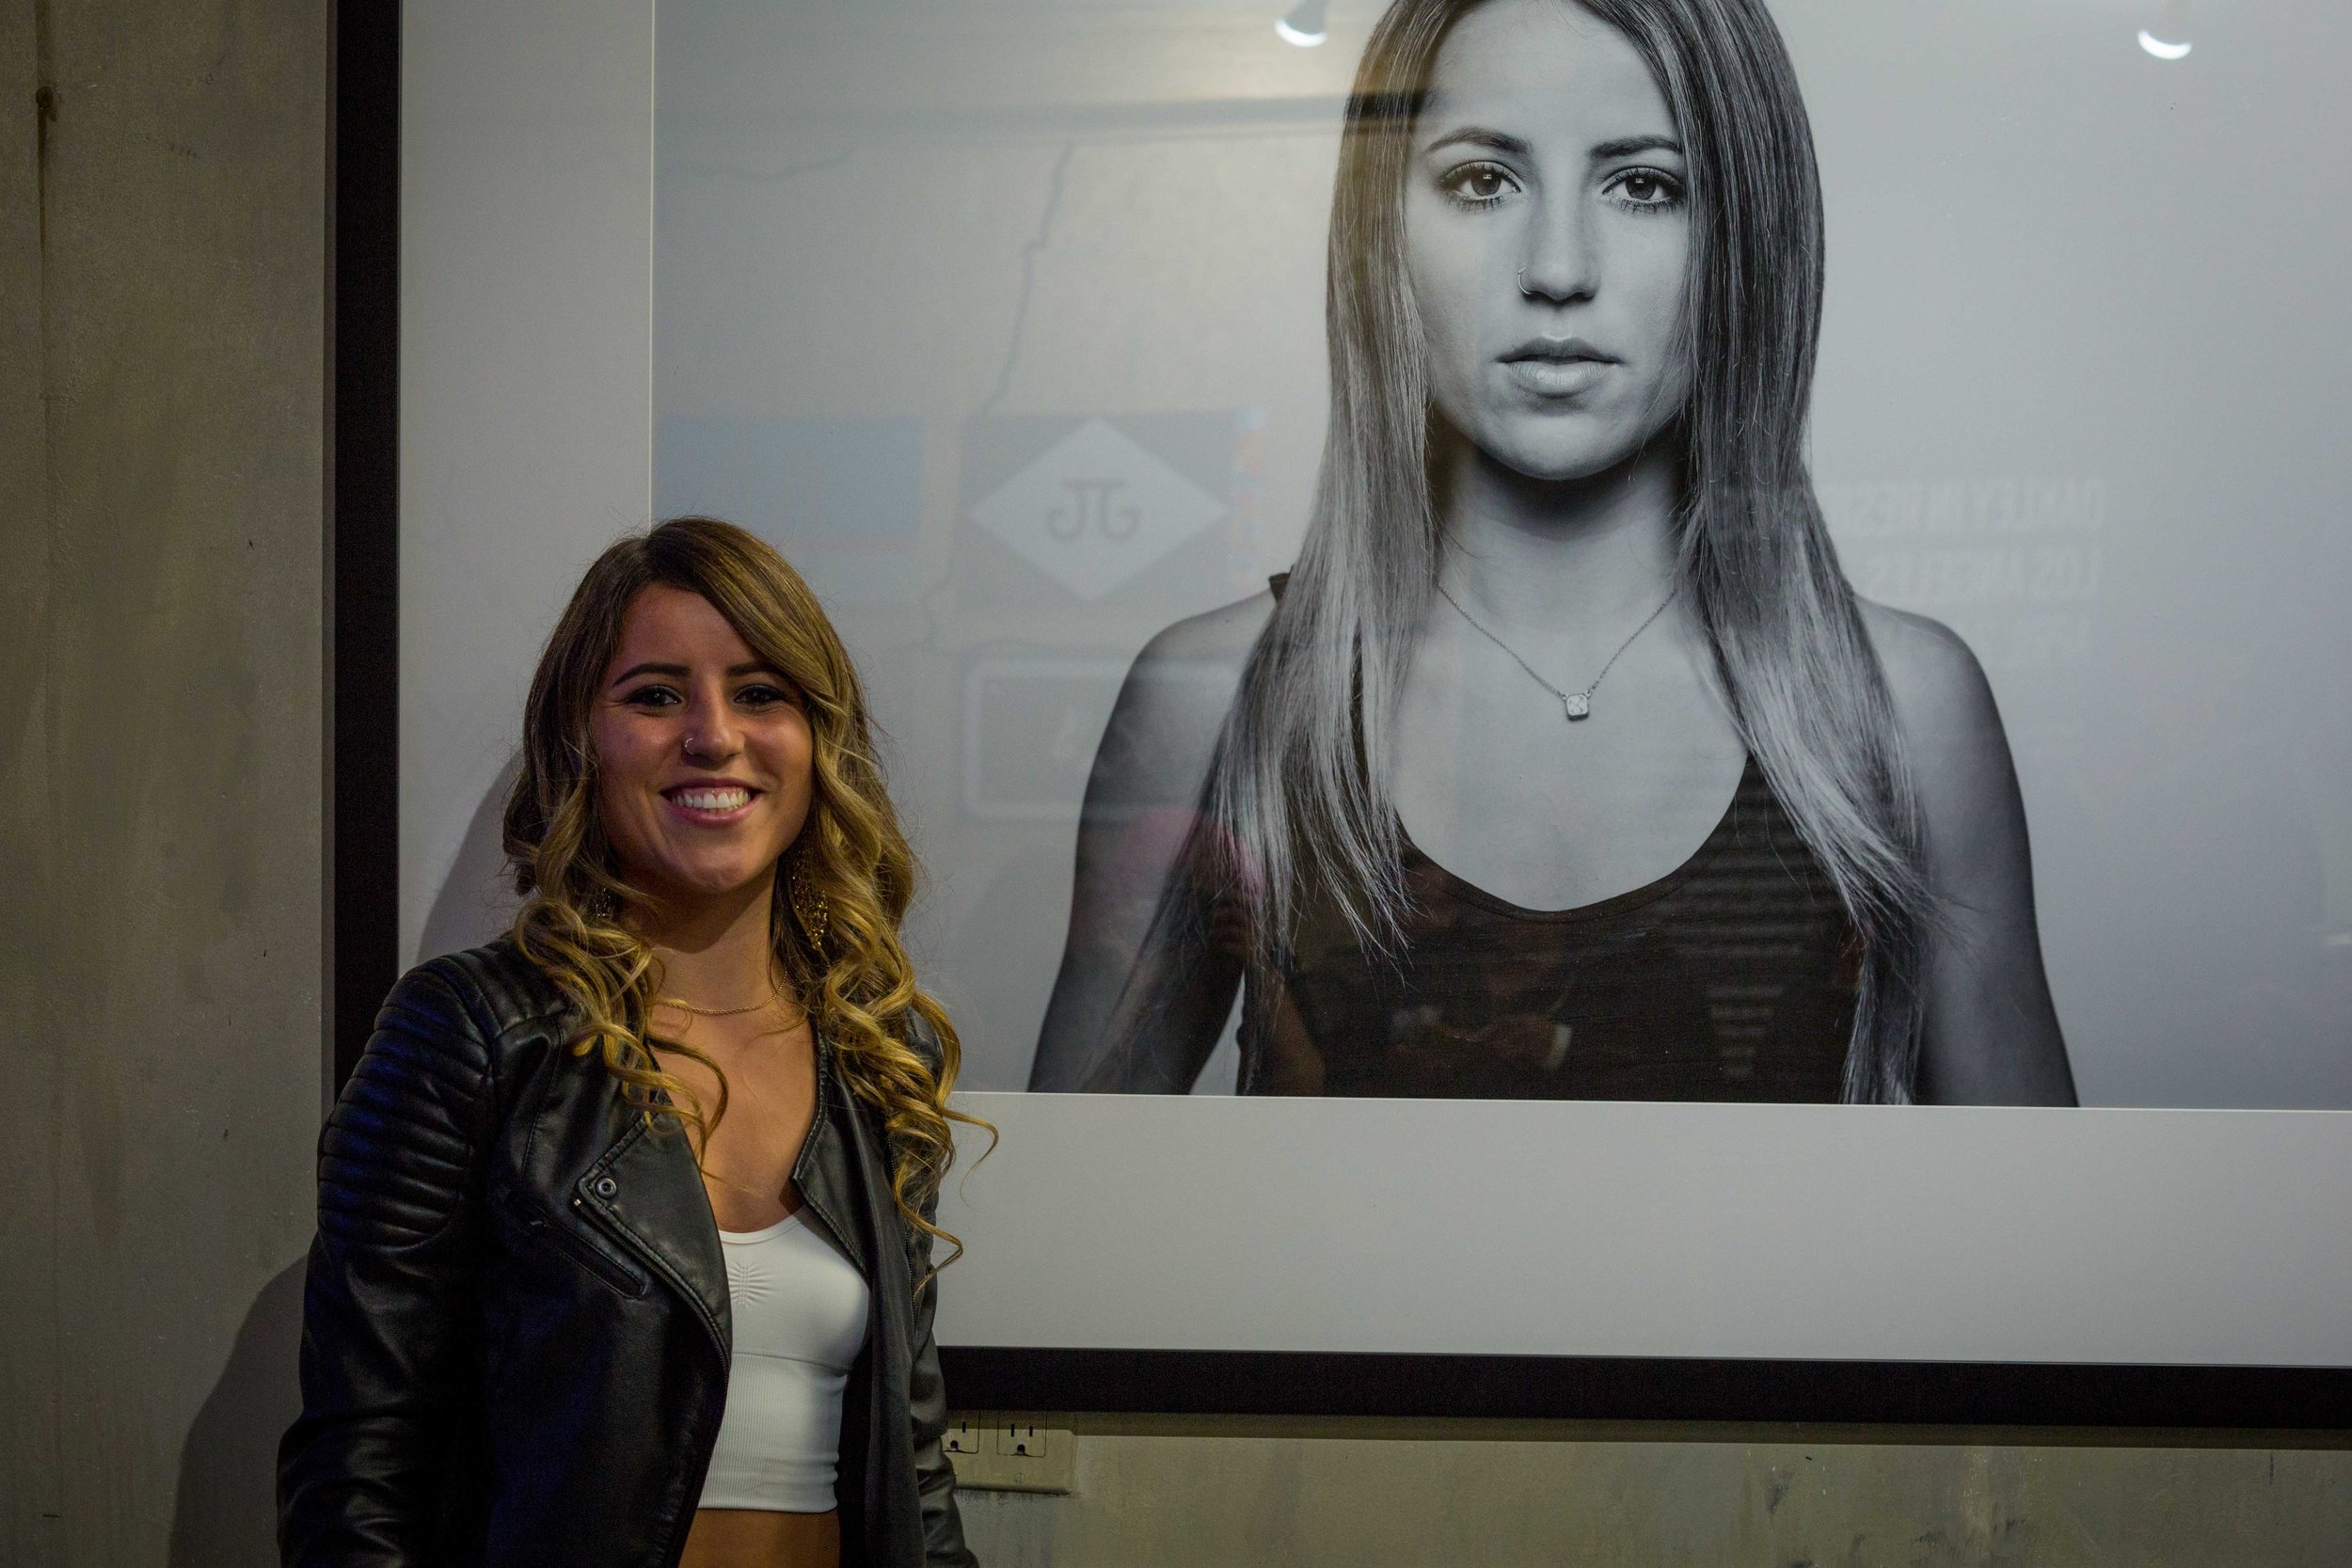 Leticia Bufoni next to her exhibition portrait.